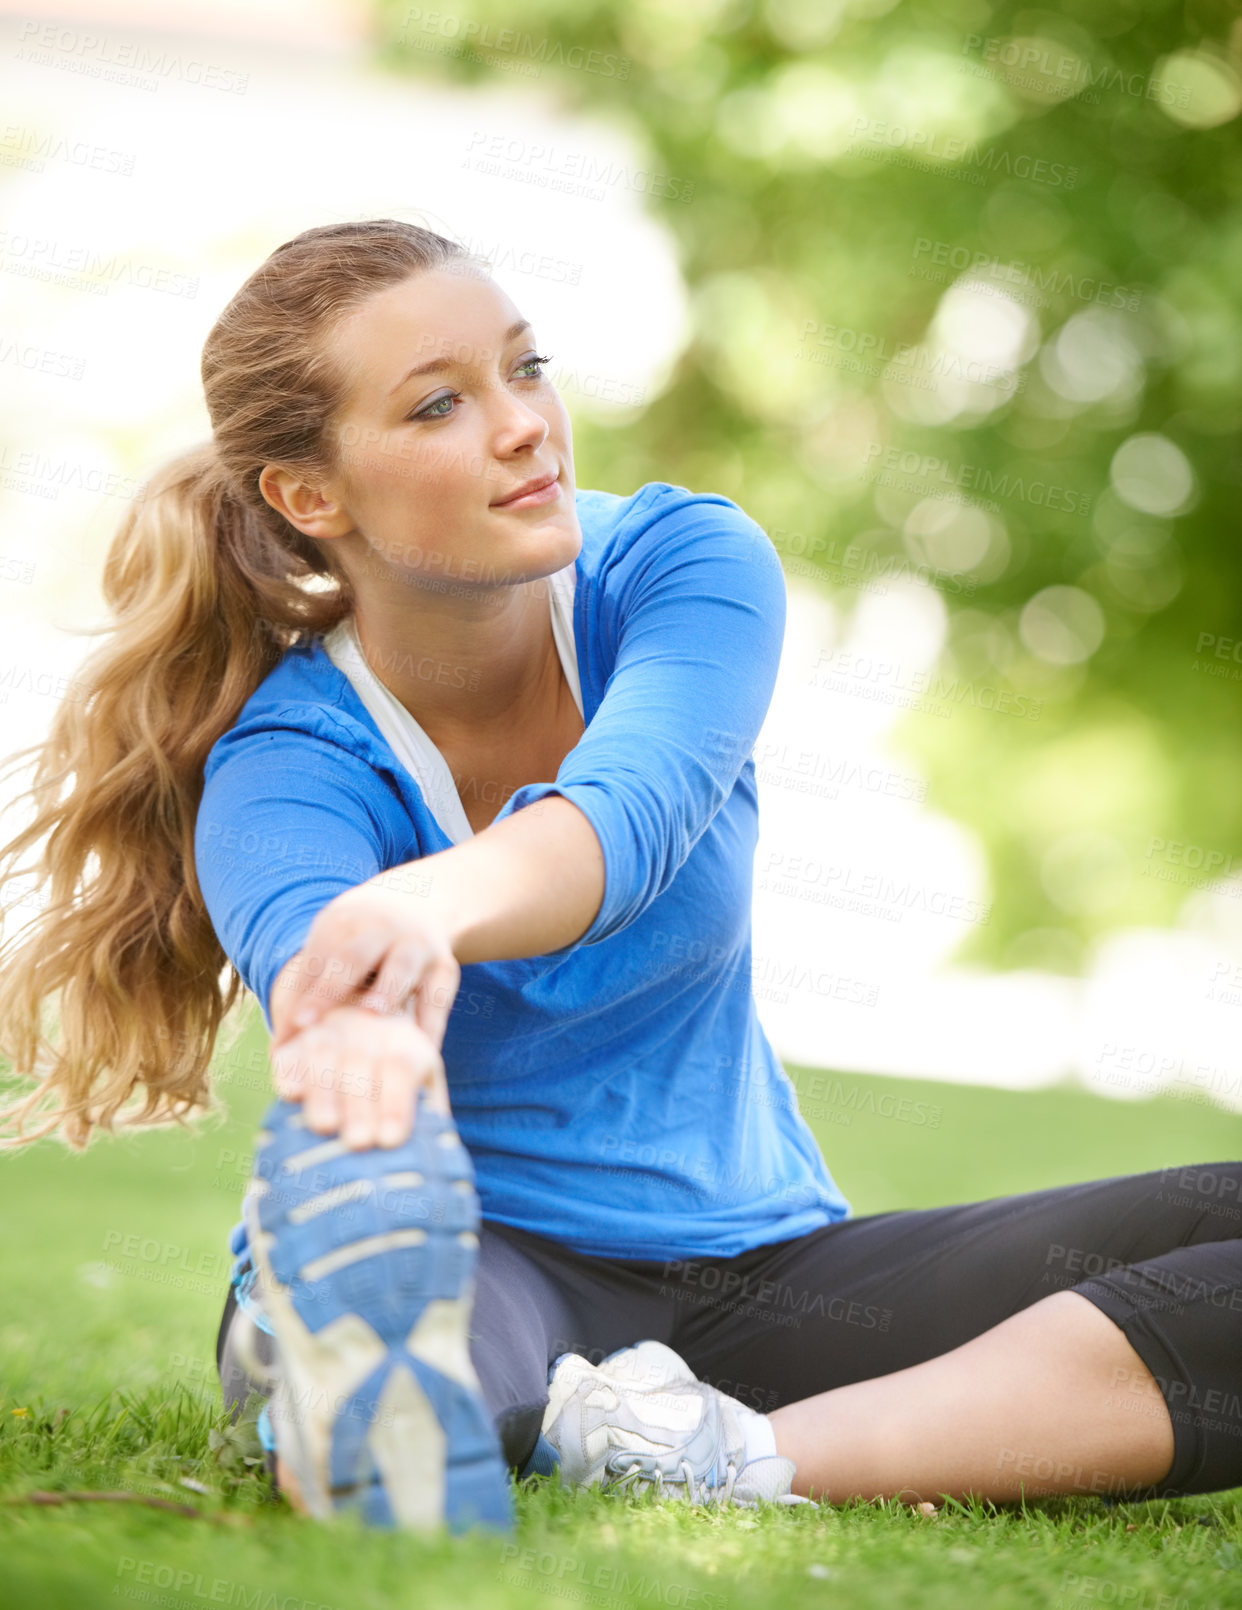 Buy stock photo Attractive young runner stretching before a run